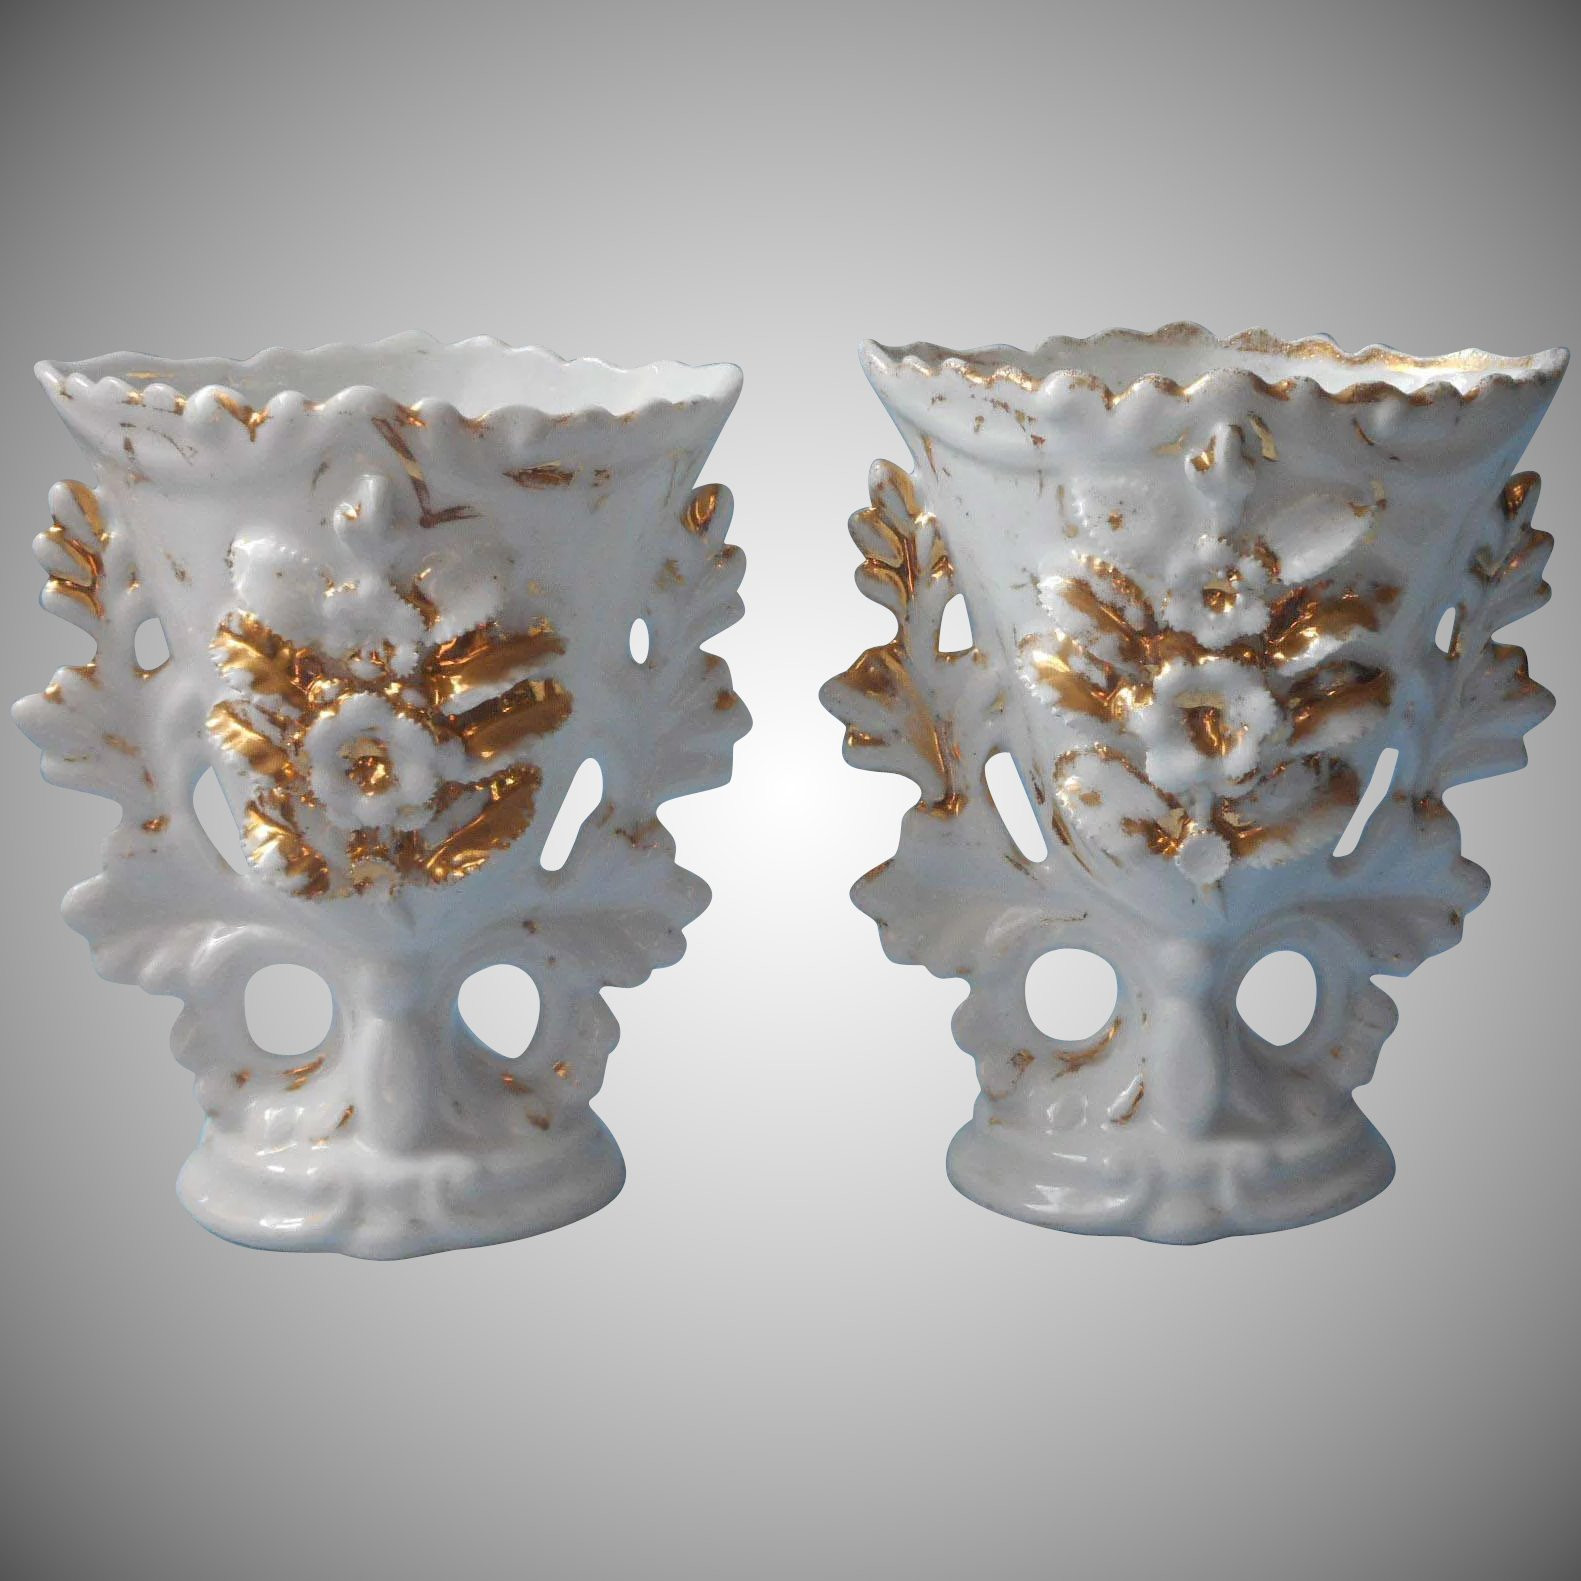 26 Ideal White and Gold Ceramic Vase 2024 free download white and gold ceramic vase of victorian mantel vases pair gold white antique china mercy maude with victorian mantel vases pair gold white antique china click to expand